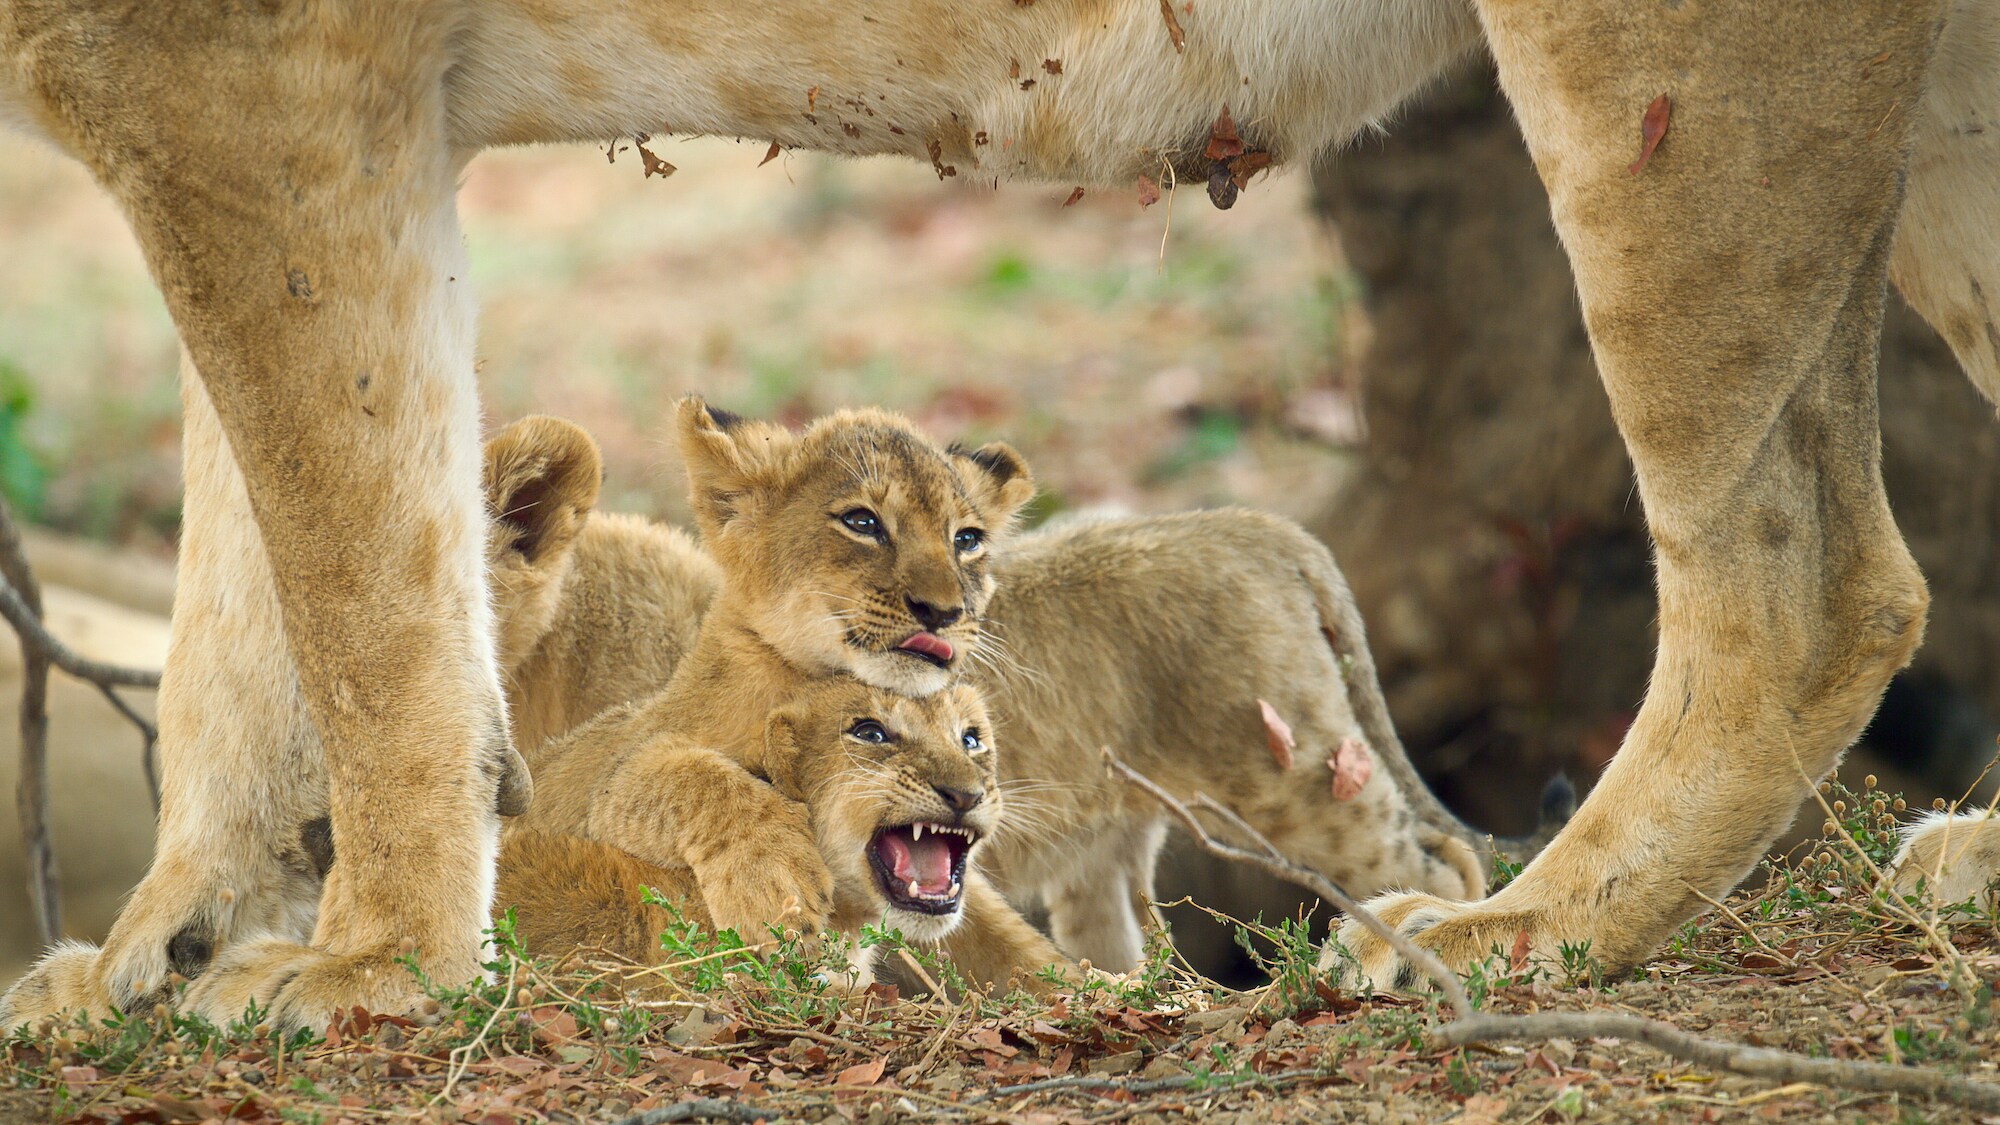 Two lion cubs play fighting underneath their mother. (Credit: National Geographic/Sam Stewart for Disney+)